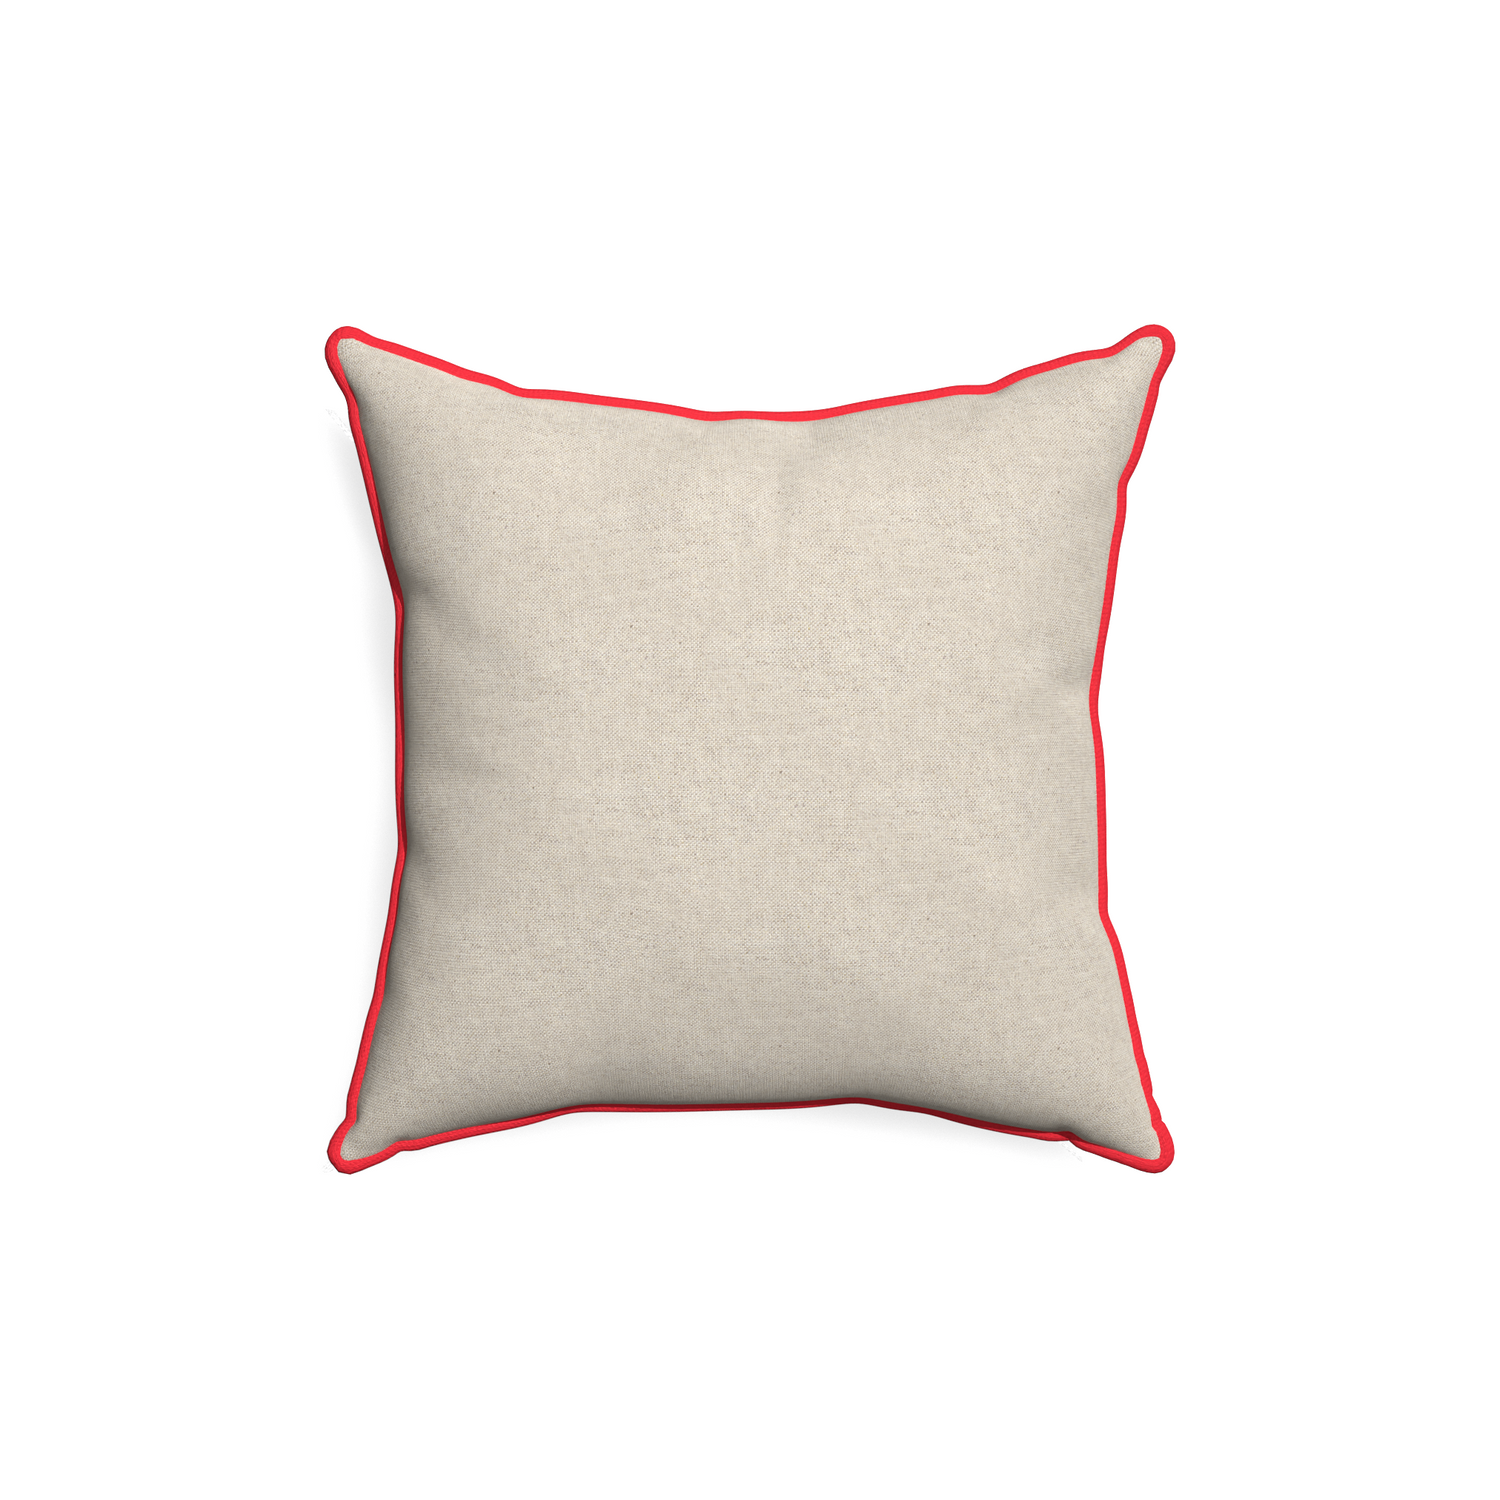 18-square oat custom light brownpillow with cherry piping on white background